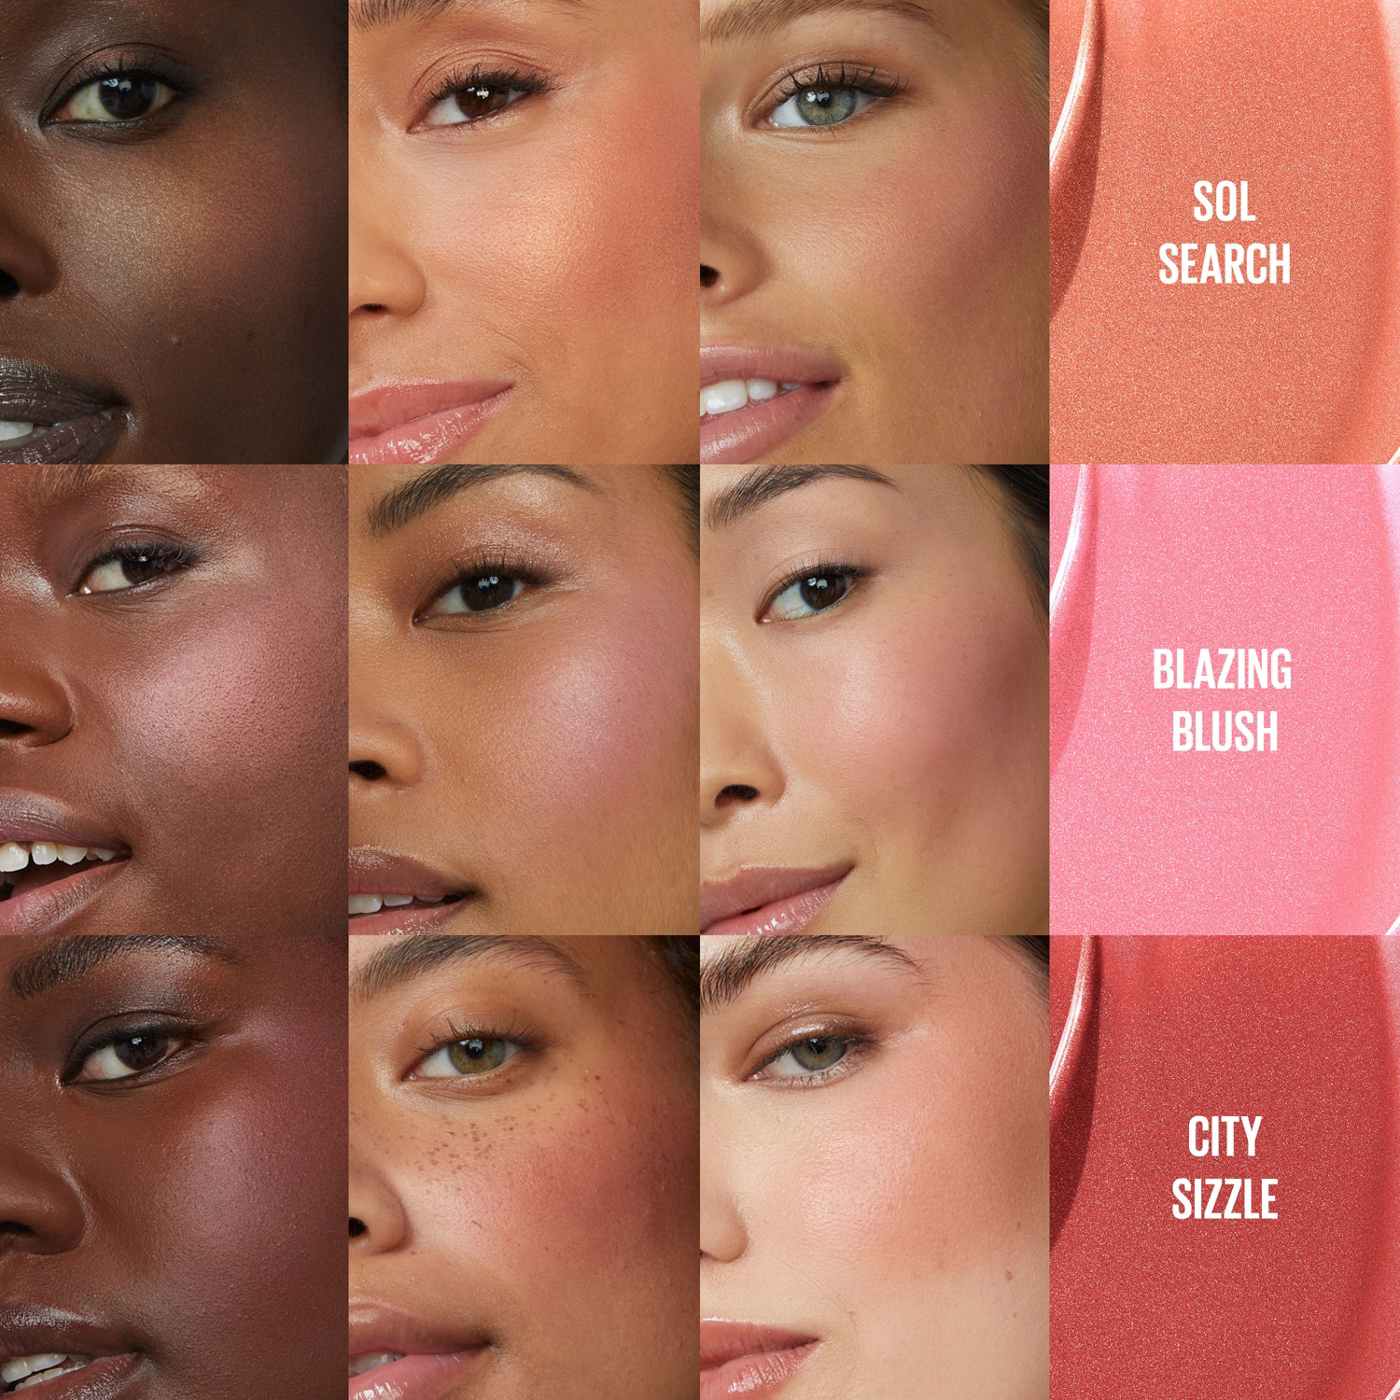 Maybelline Sunkisser Multi-Use Liquid Blush And Bronzer - City Sizzle; image 6 of 6